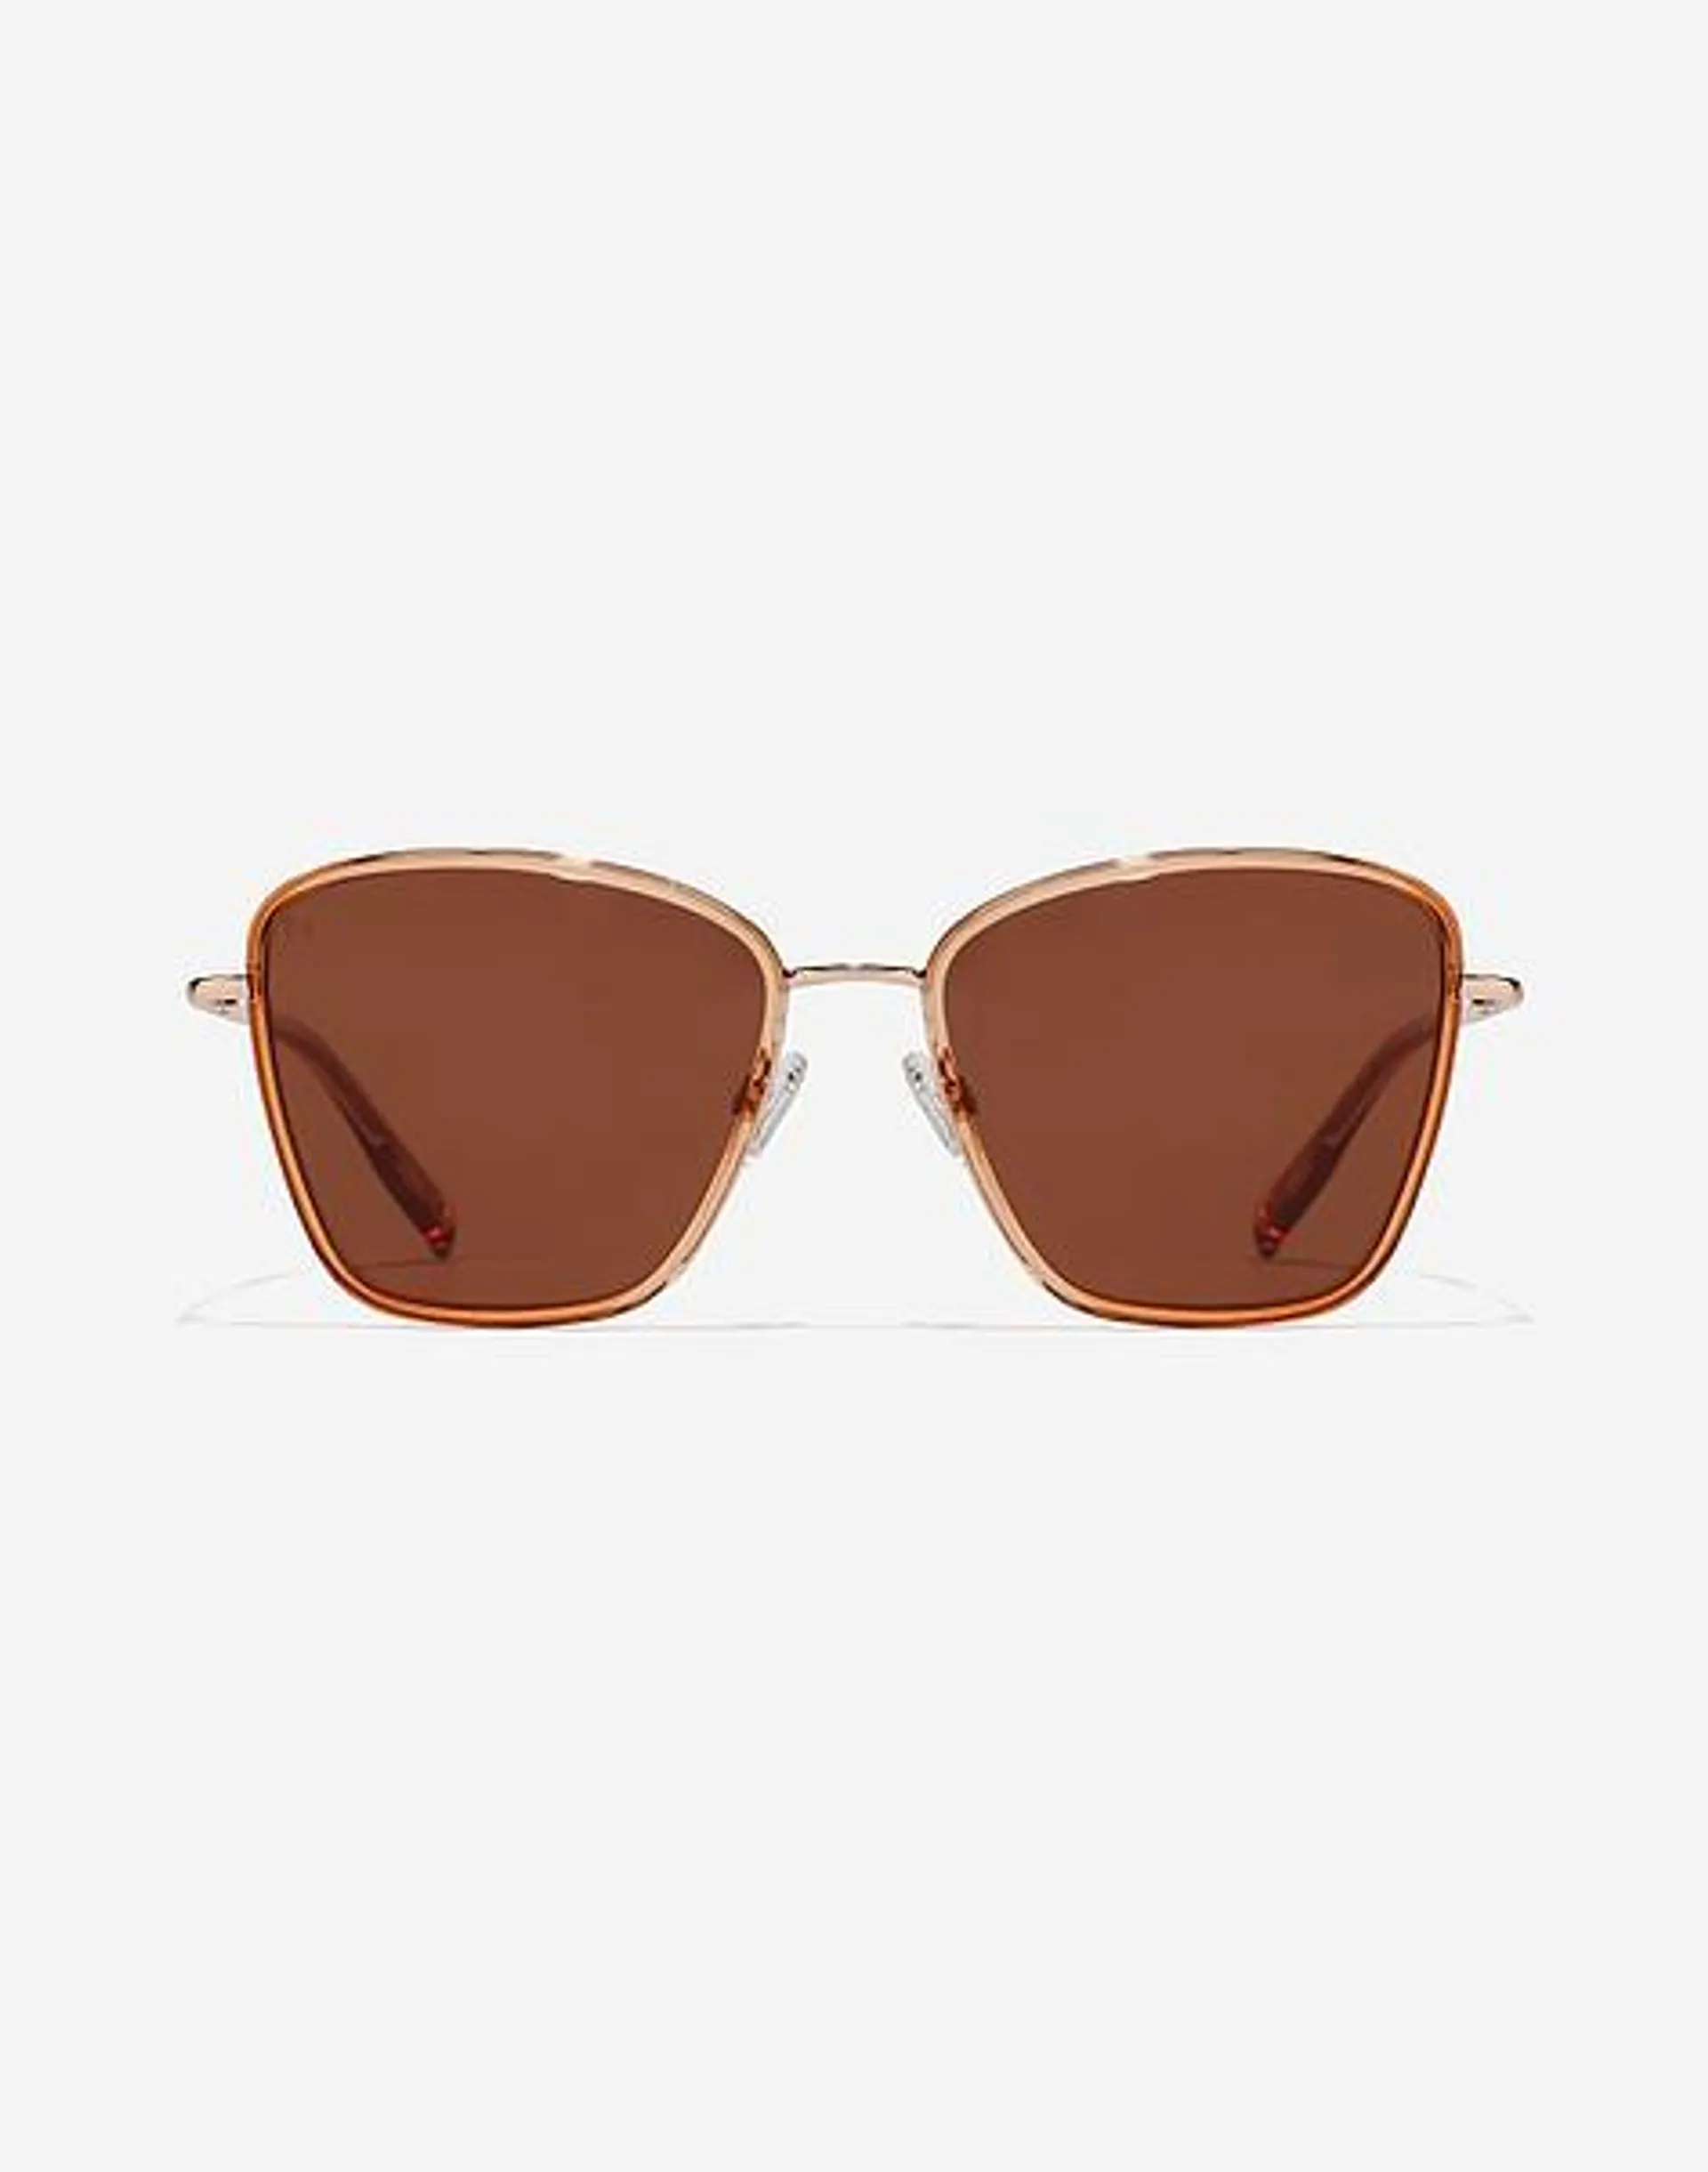 CHILL - POLARIZED SAND BROWN